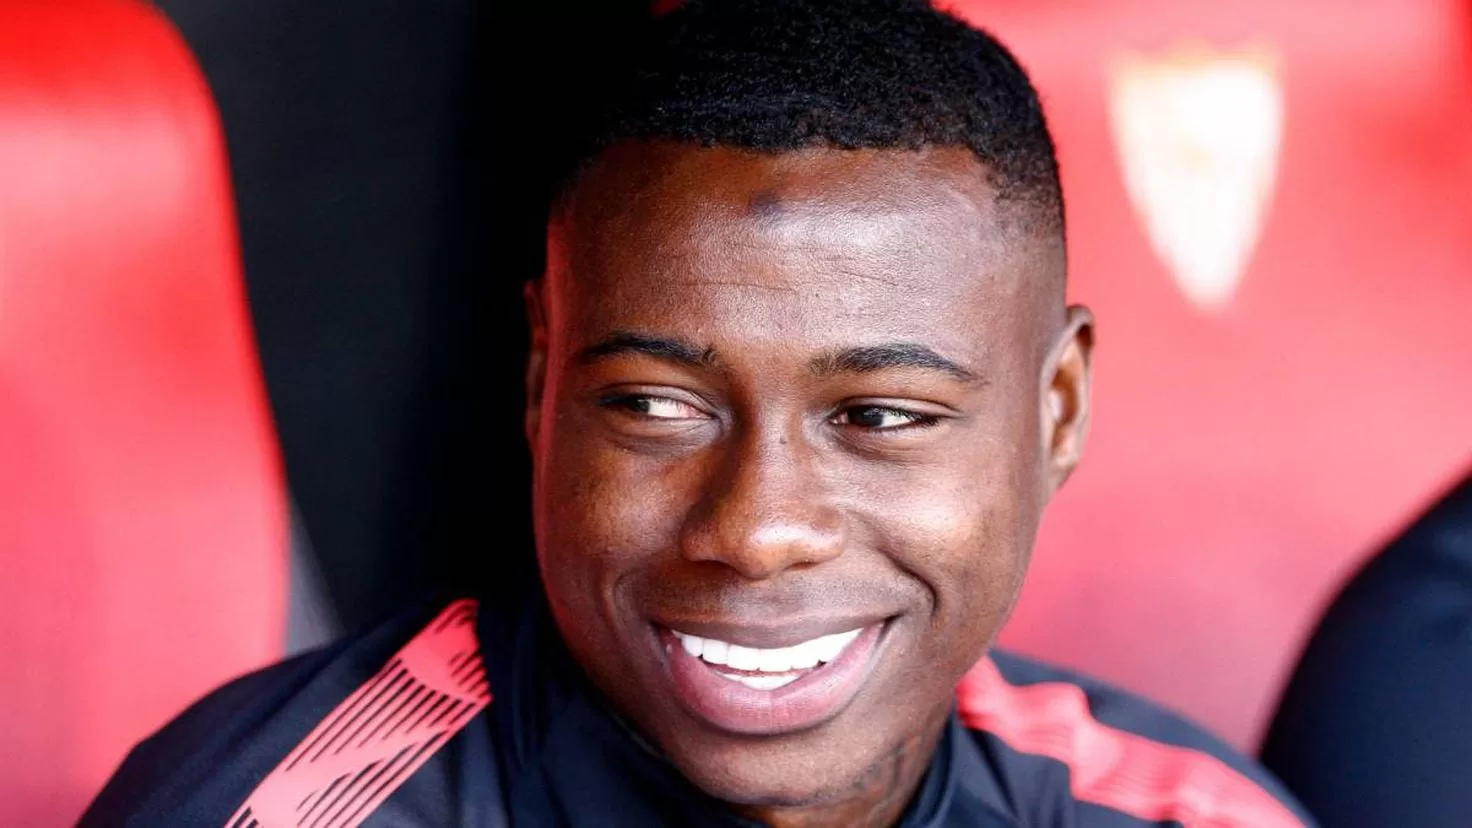 Promes, arrested in Dubai after being sentenced to six years in prison for drug trafficking
